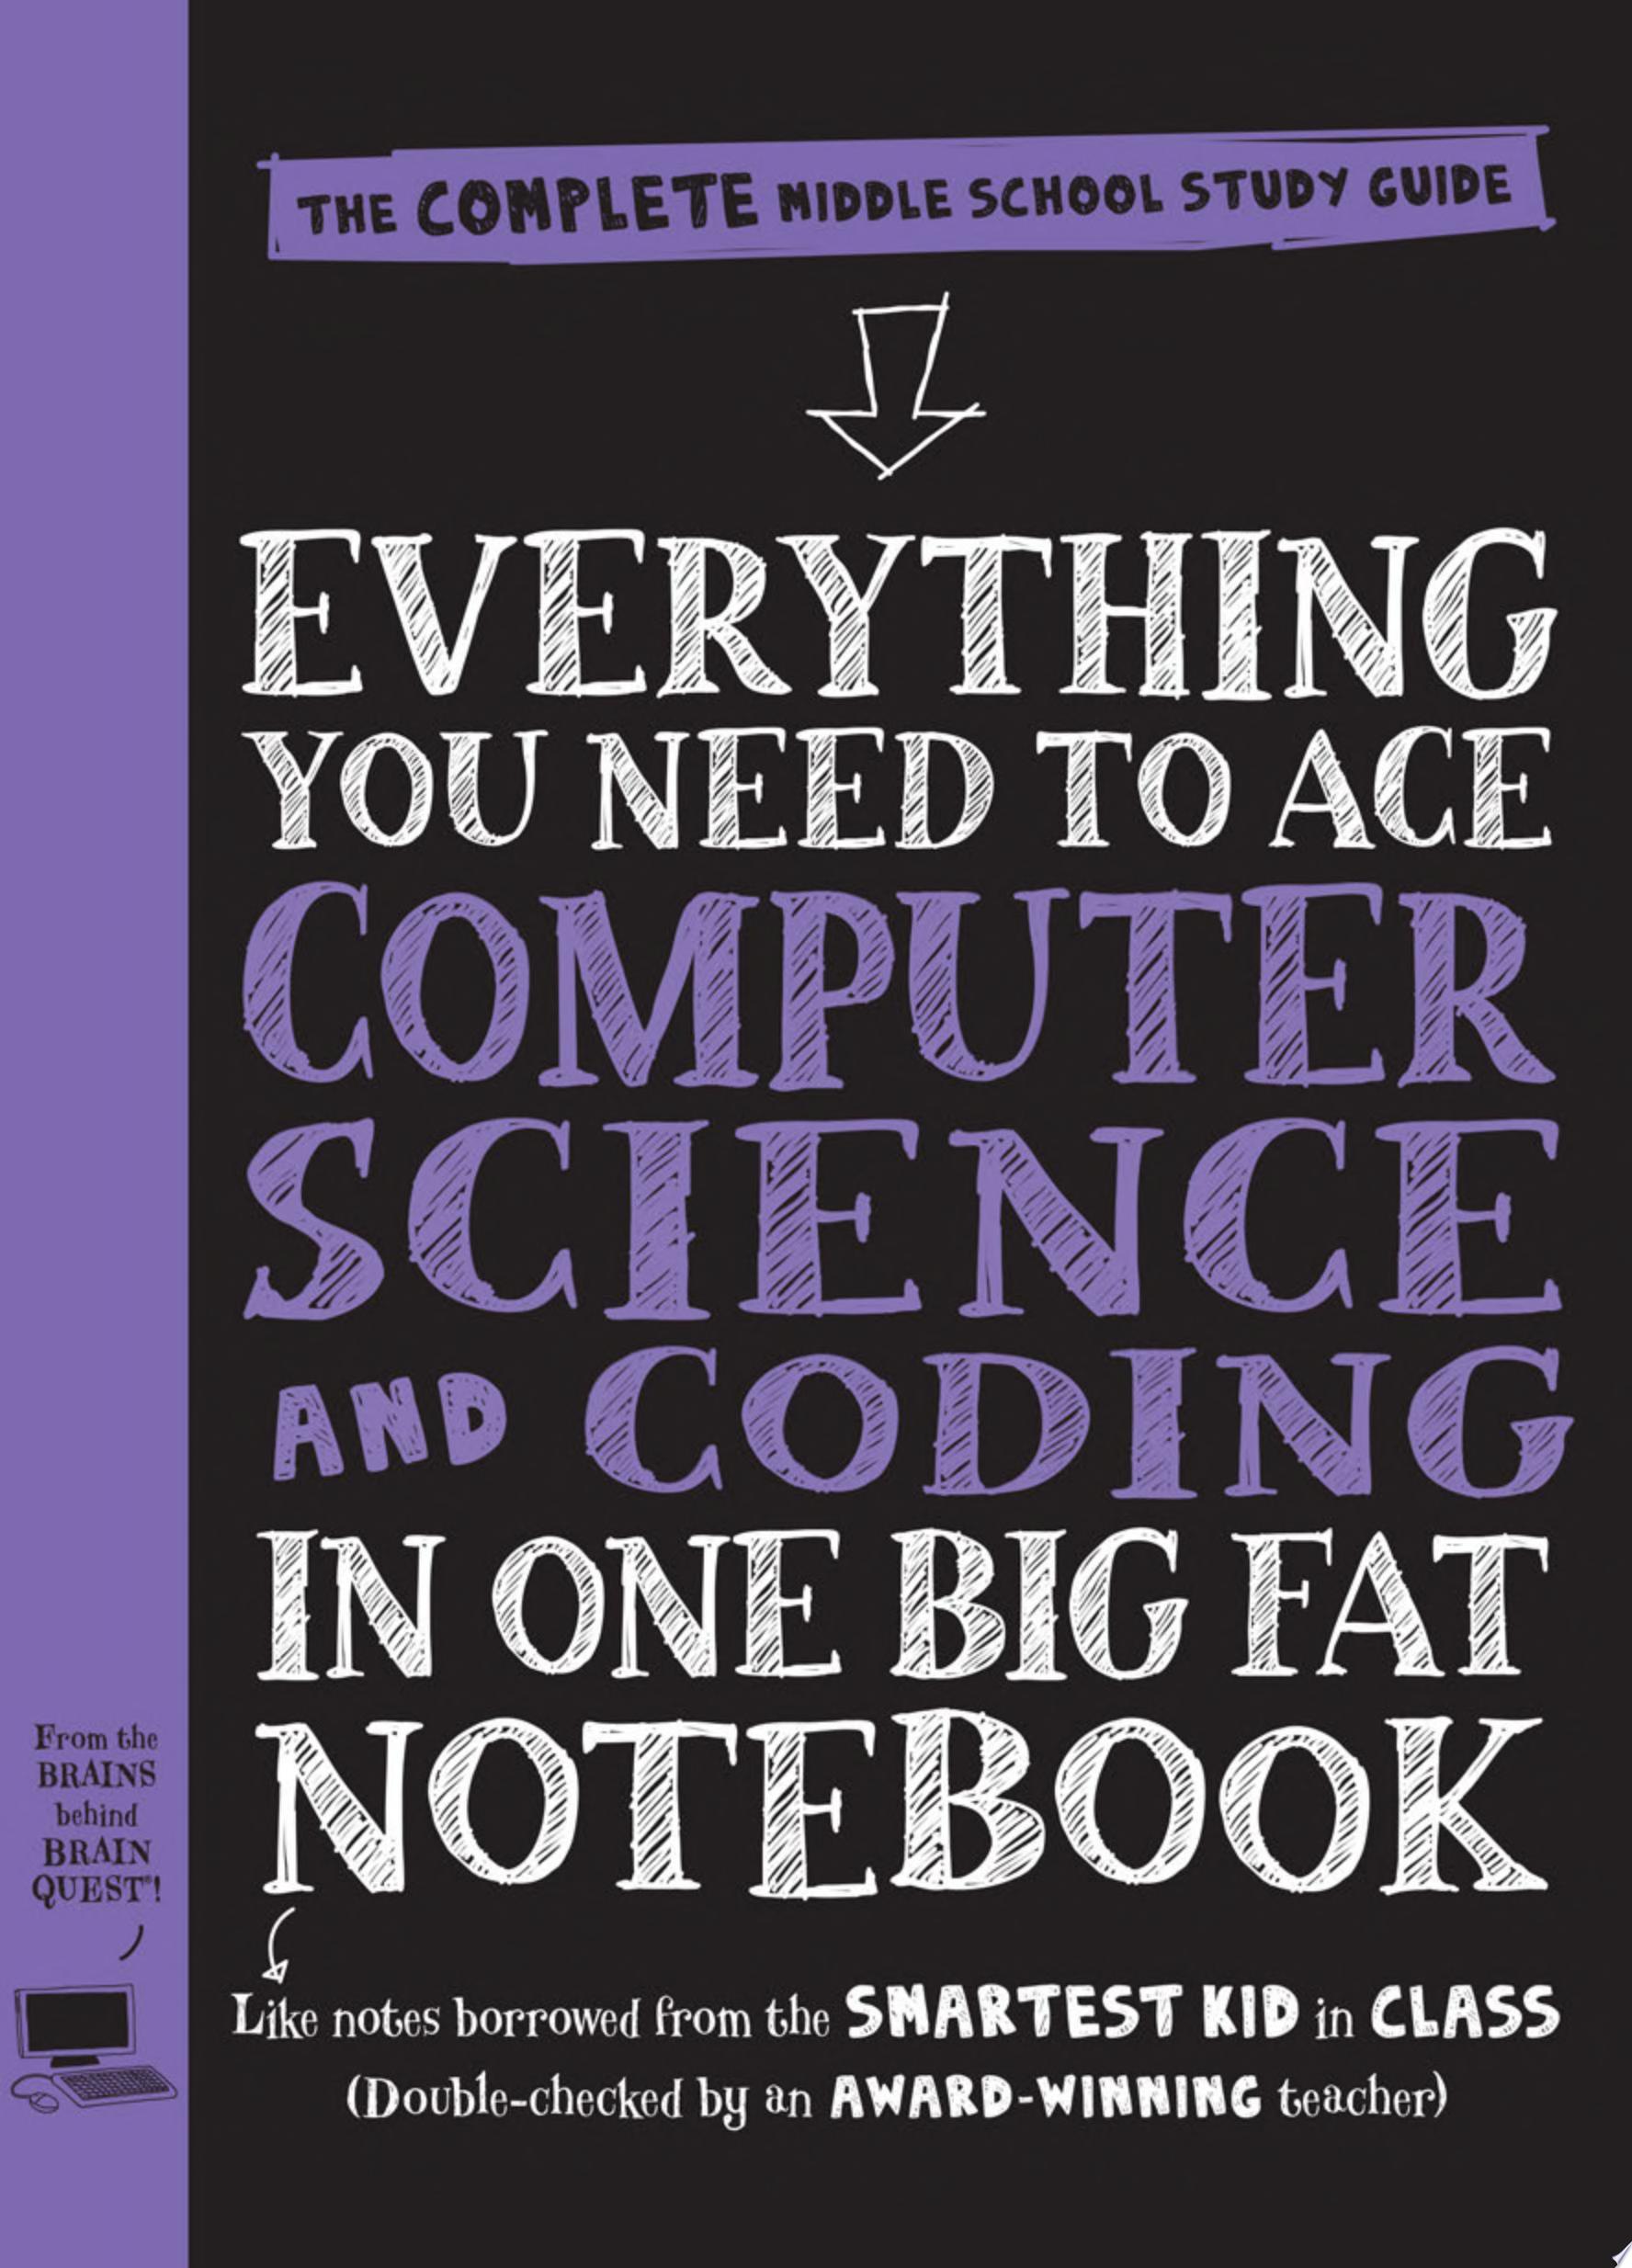 Image for "Everything You Need to Ace Computer Science and Coding in One Big Fat Notebook"